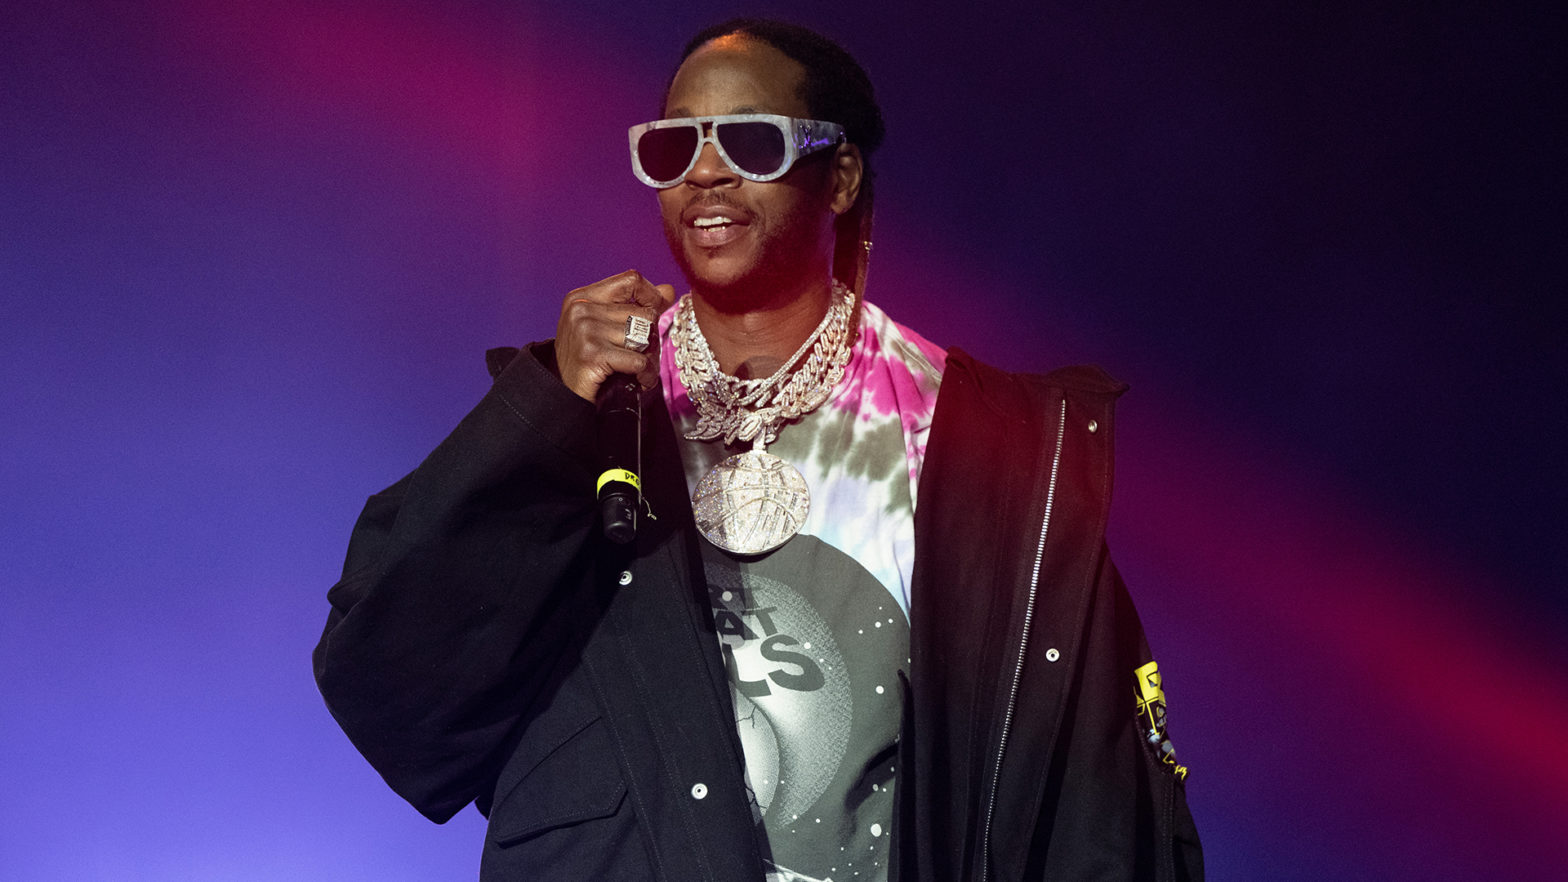 2 Chainz Goes From Growing Up On Krystal To Head Of Creative Marketing For The Fast-Food Chain